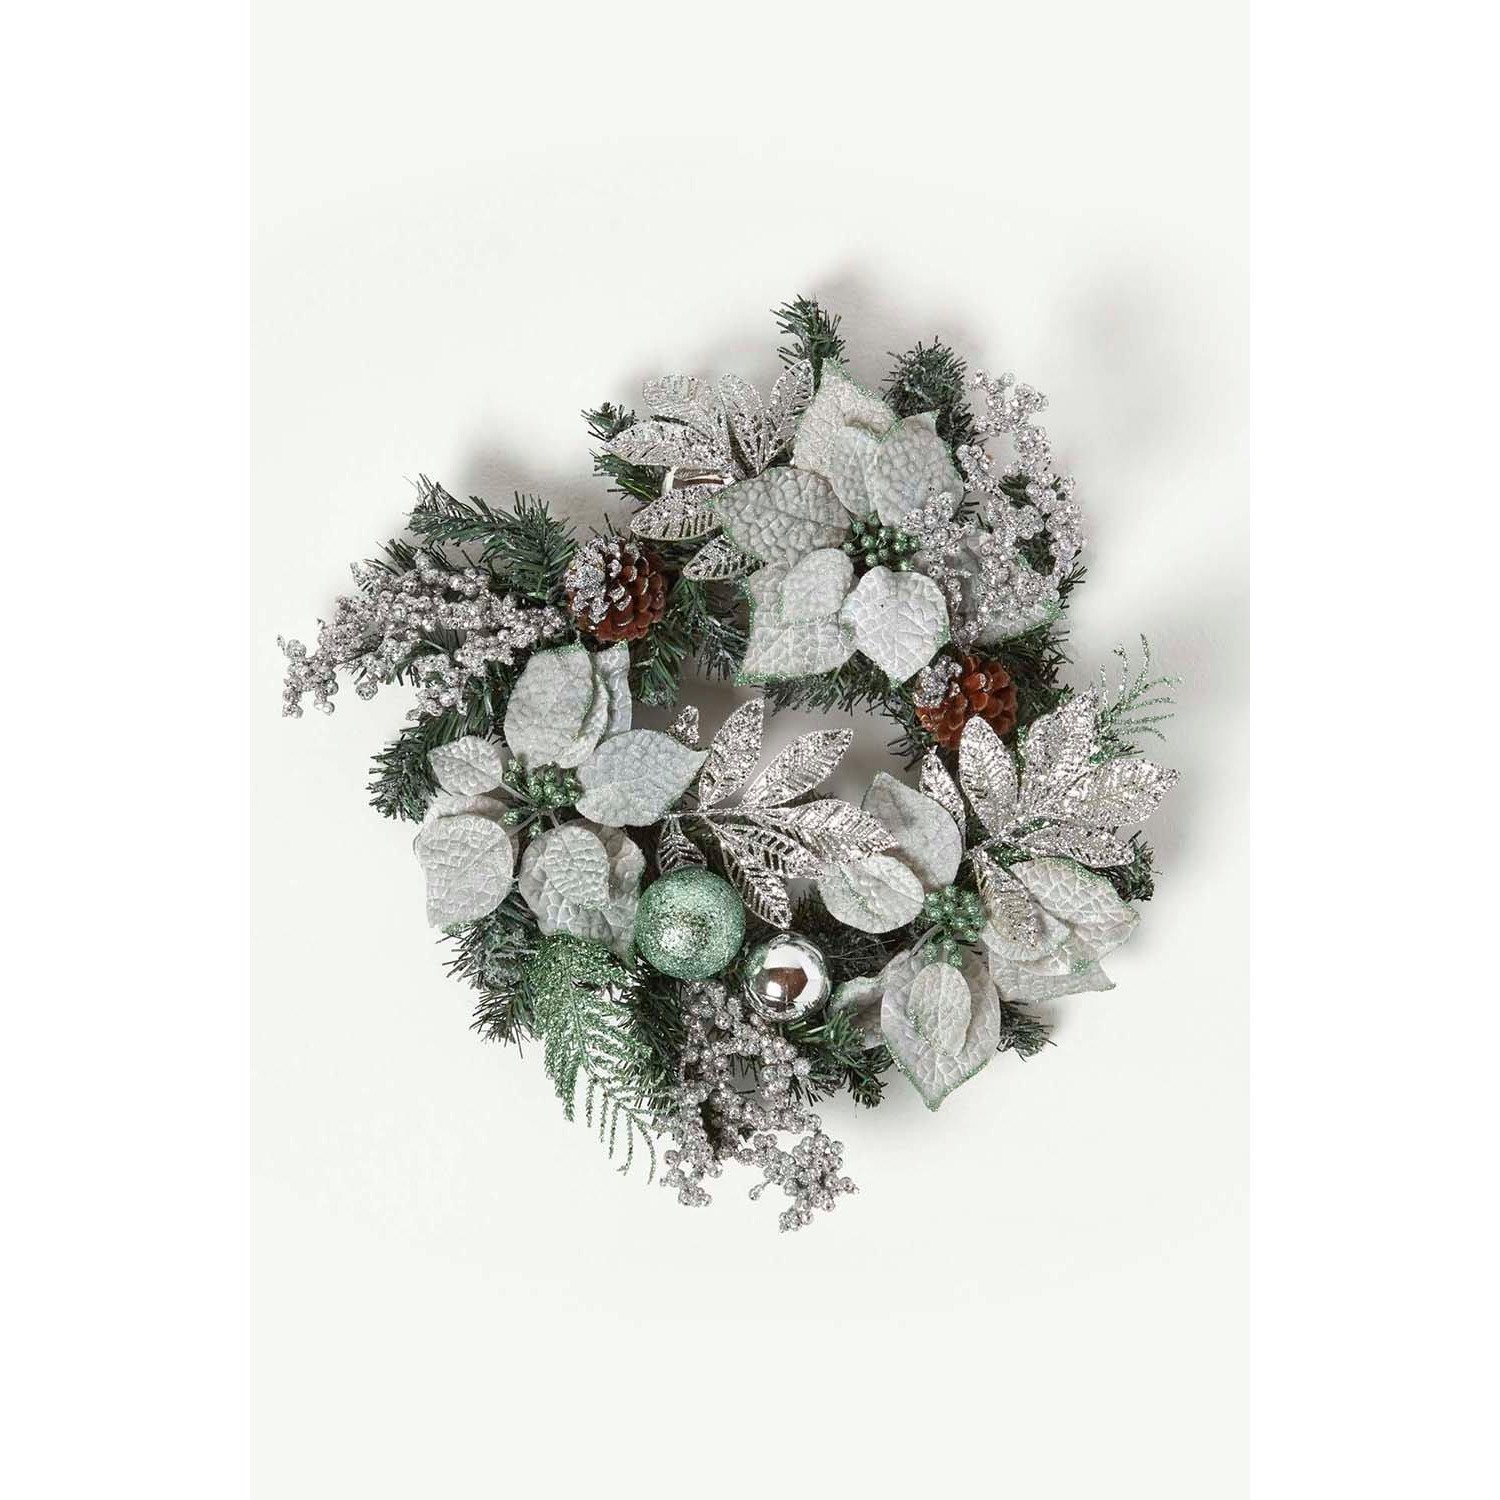 Mint Green & Silver Christmas Wreath - image 1